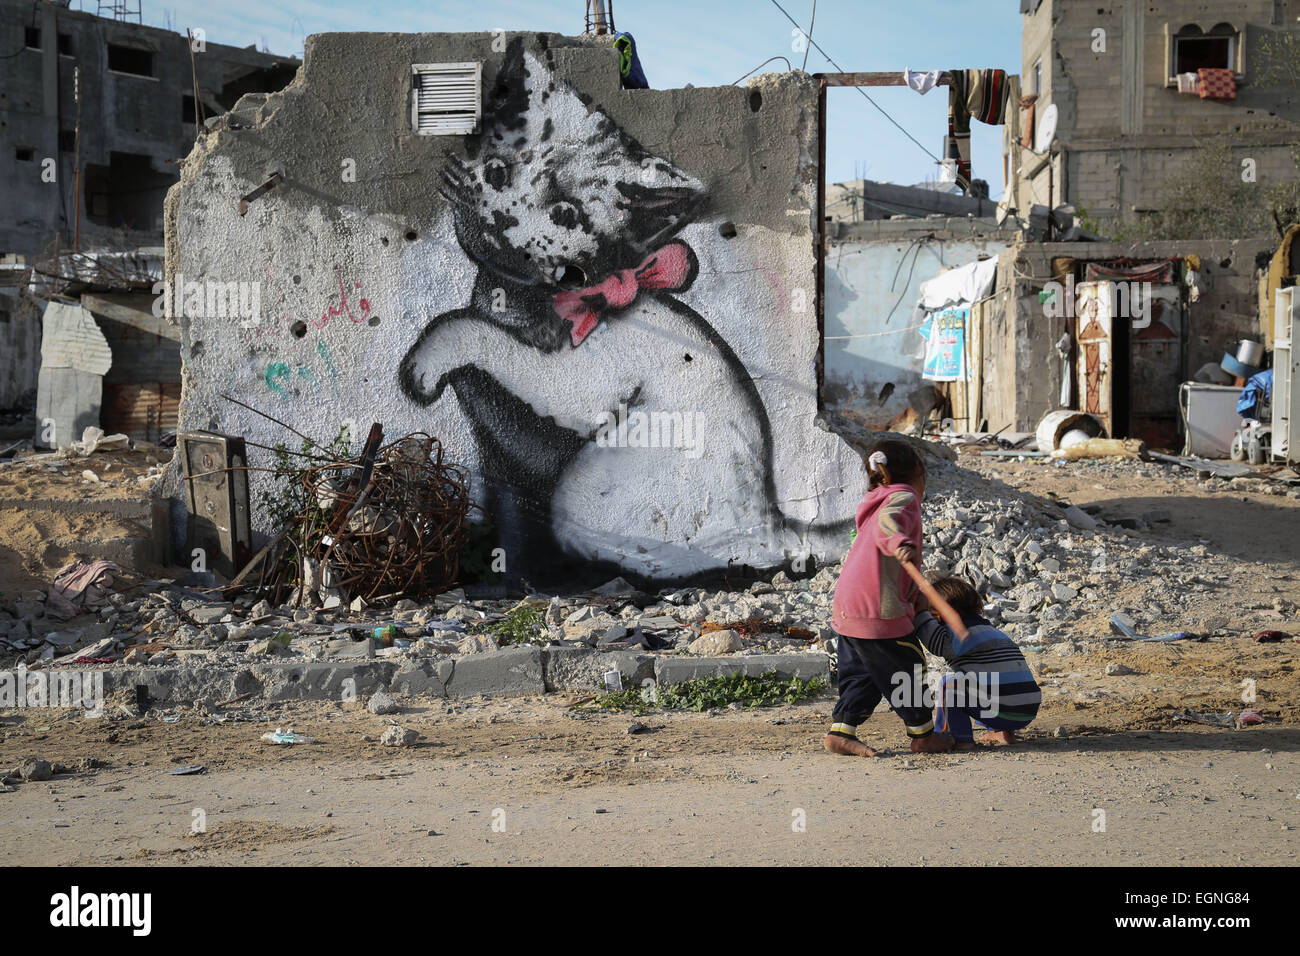 Palestinian children in front of a mural of a kitten, said to have been painted by British street artist Banksy, on the remains of a house that was destroyed during the 50-day war between Israel and Hamas militants in the summer of 2014, in the Gaza Strip town of Beit Hanun. © Ahmed Hjazy/Pacific Press/Alamy Live News Stock Photo